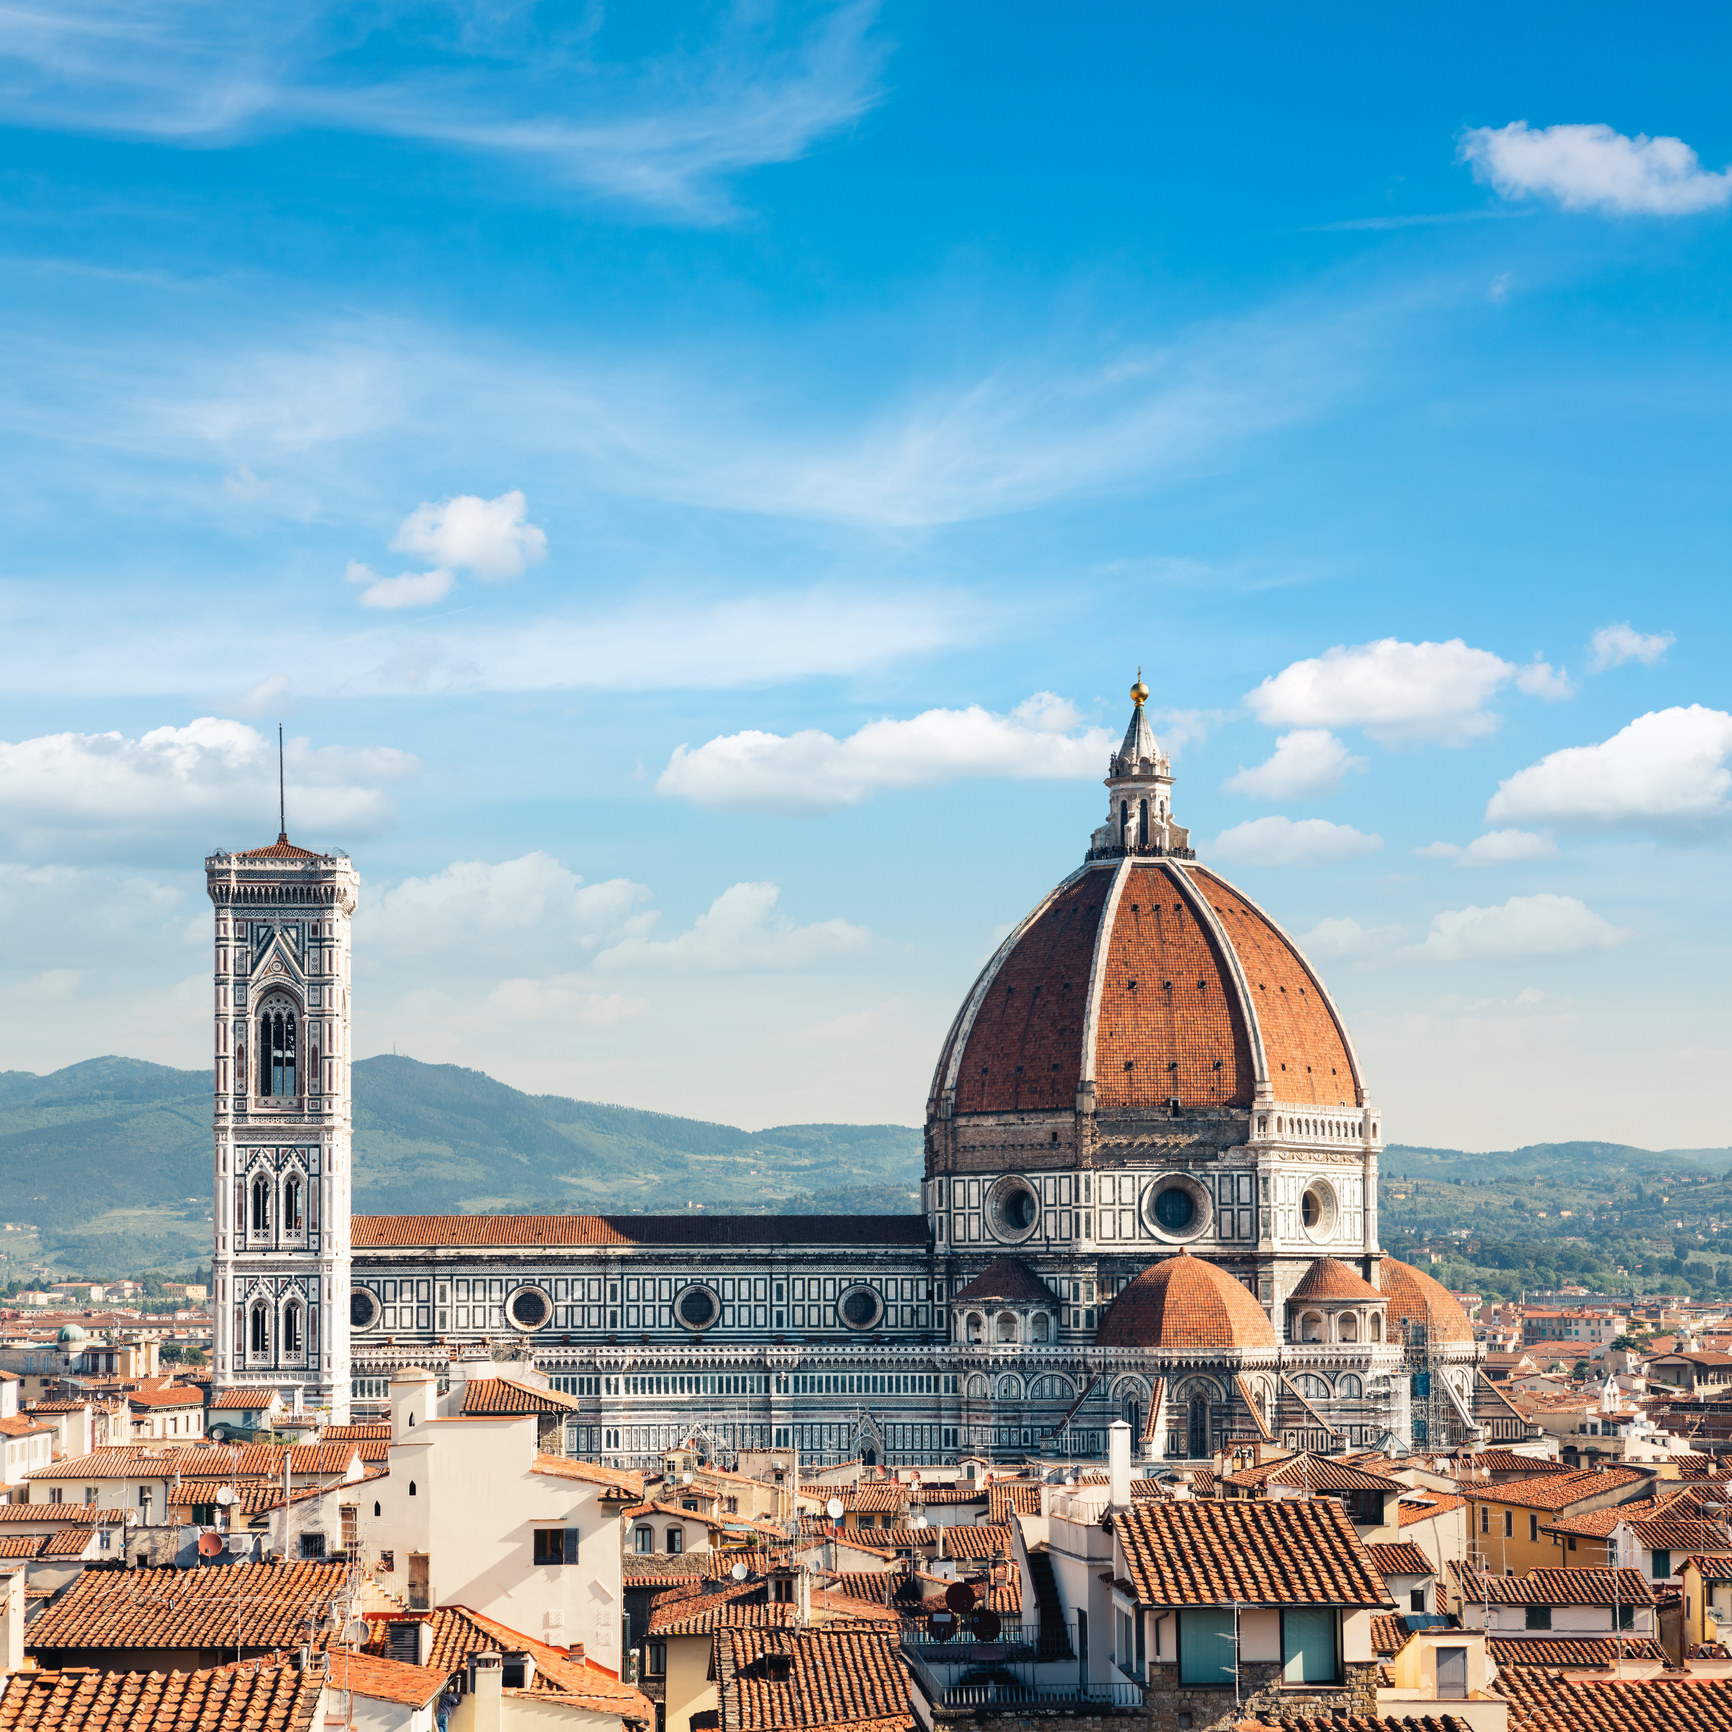 View of the Duomo cathedral from Piazzale Michelangelo